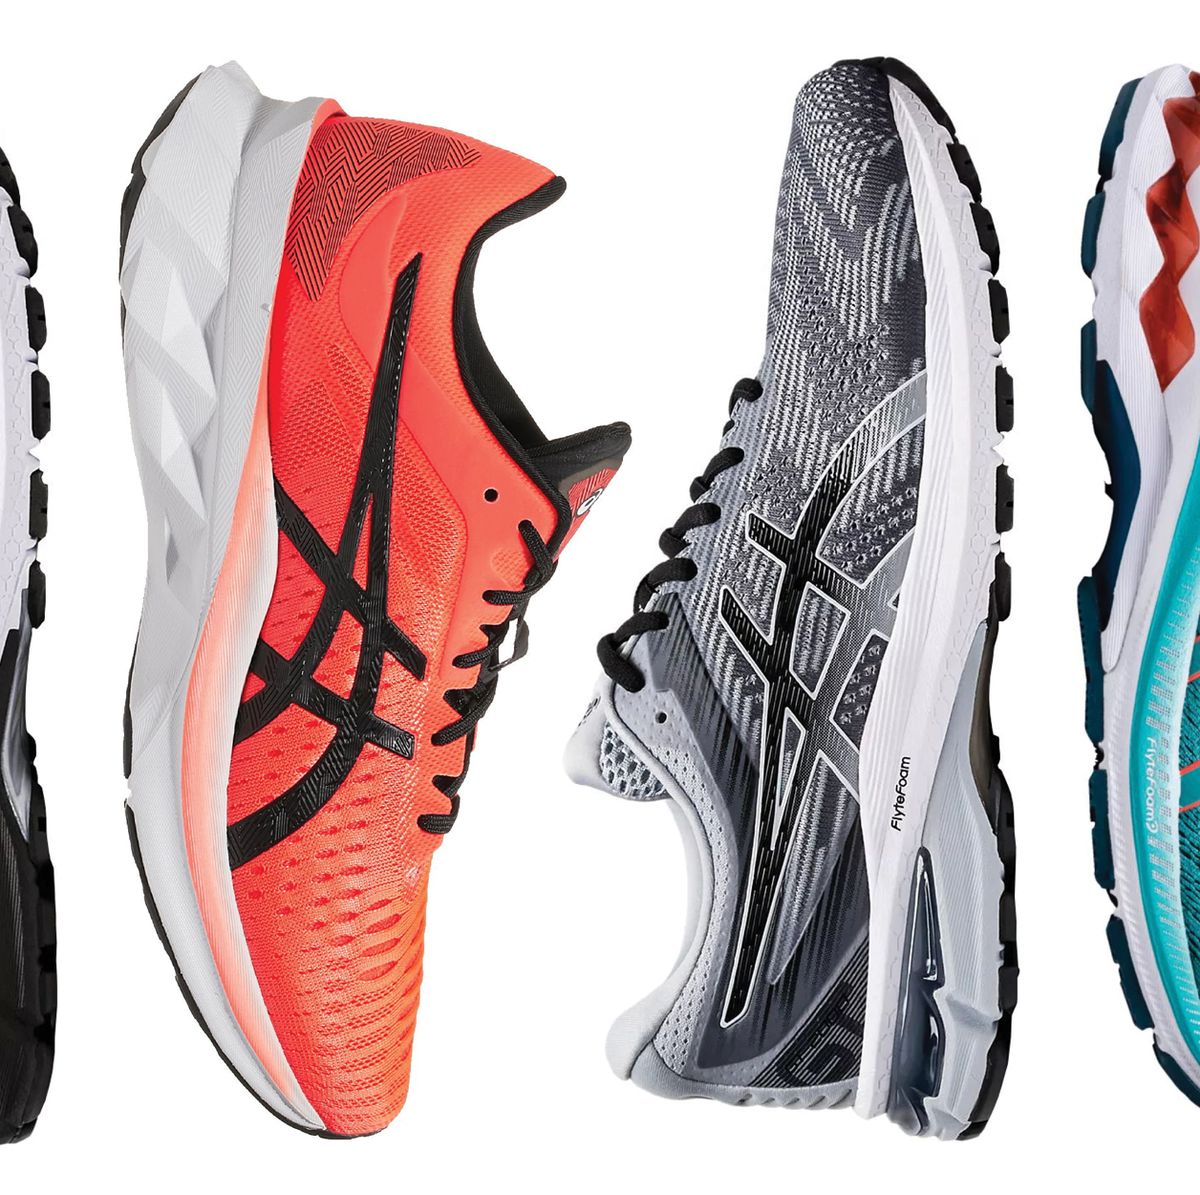 What Buy at Asics' Massive Summer Sale